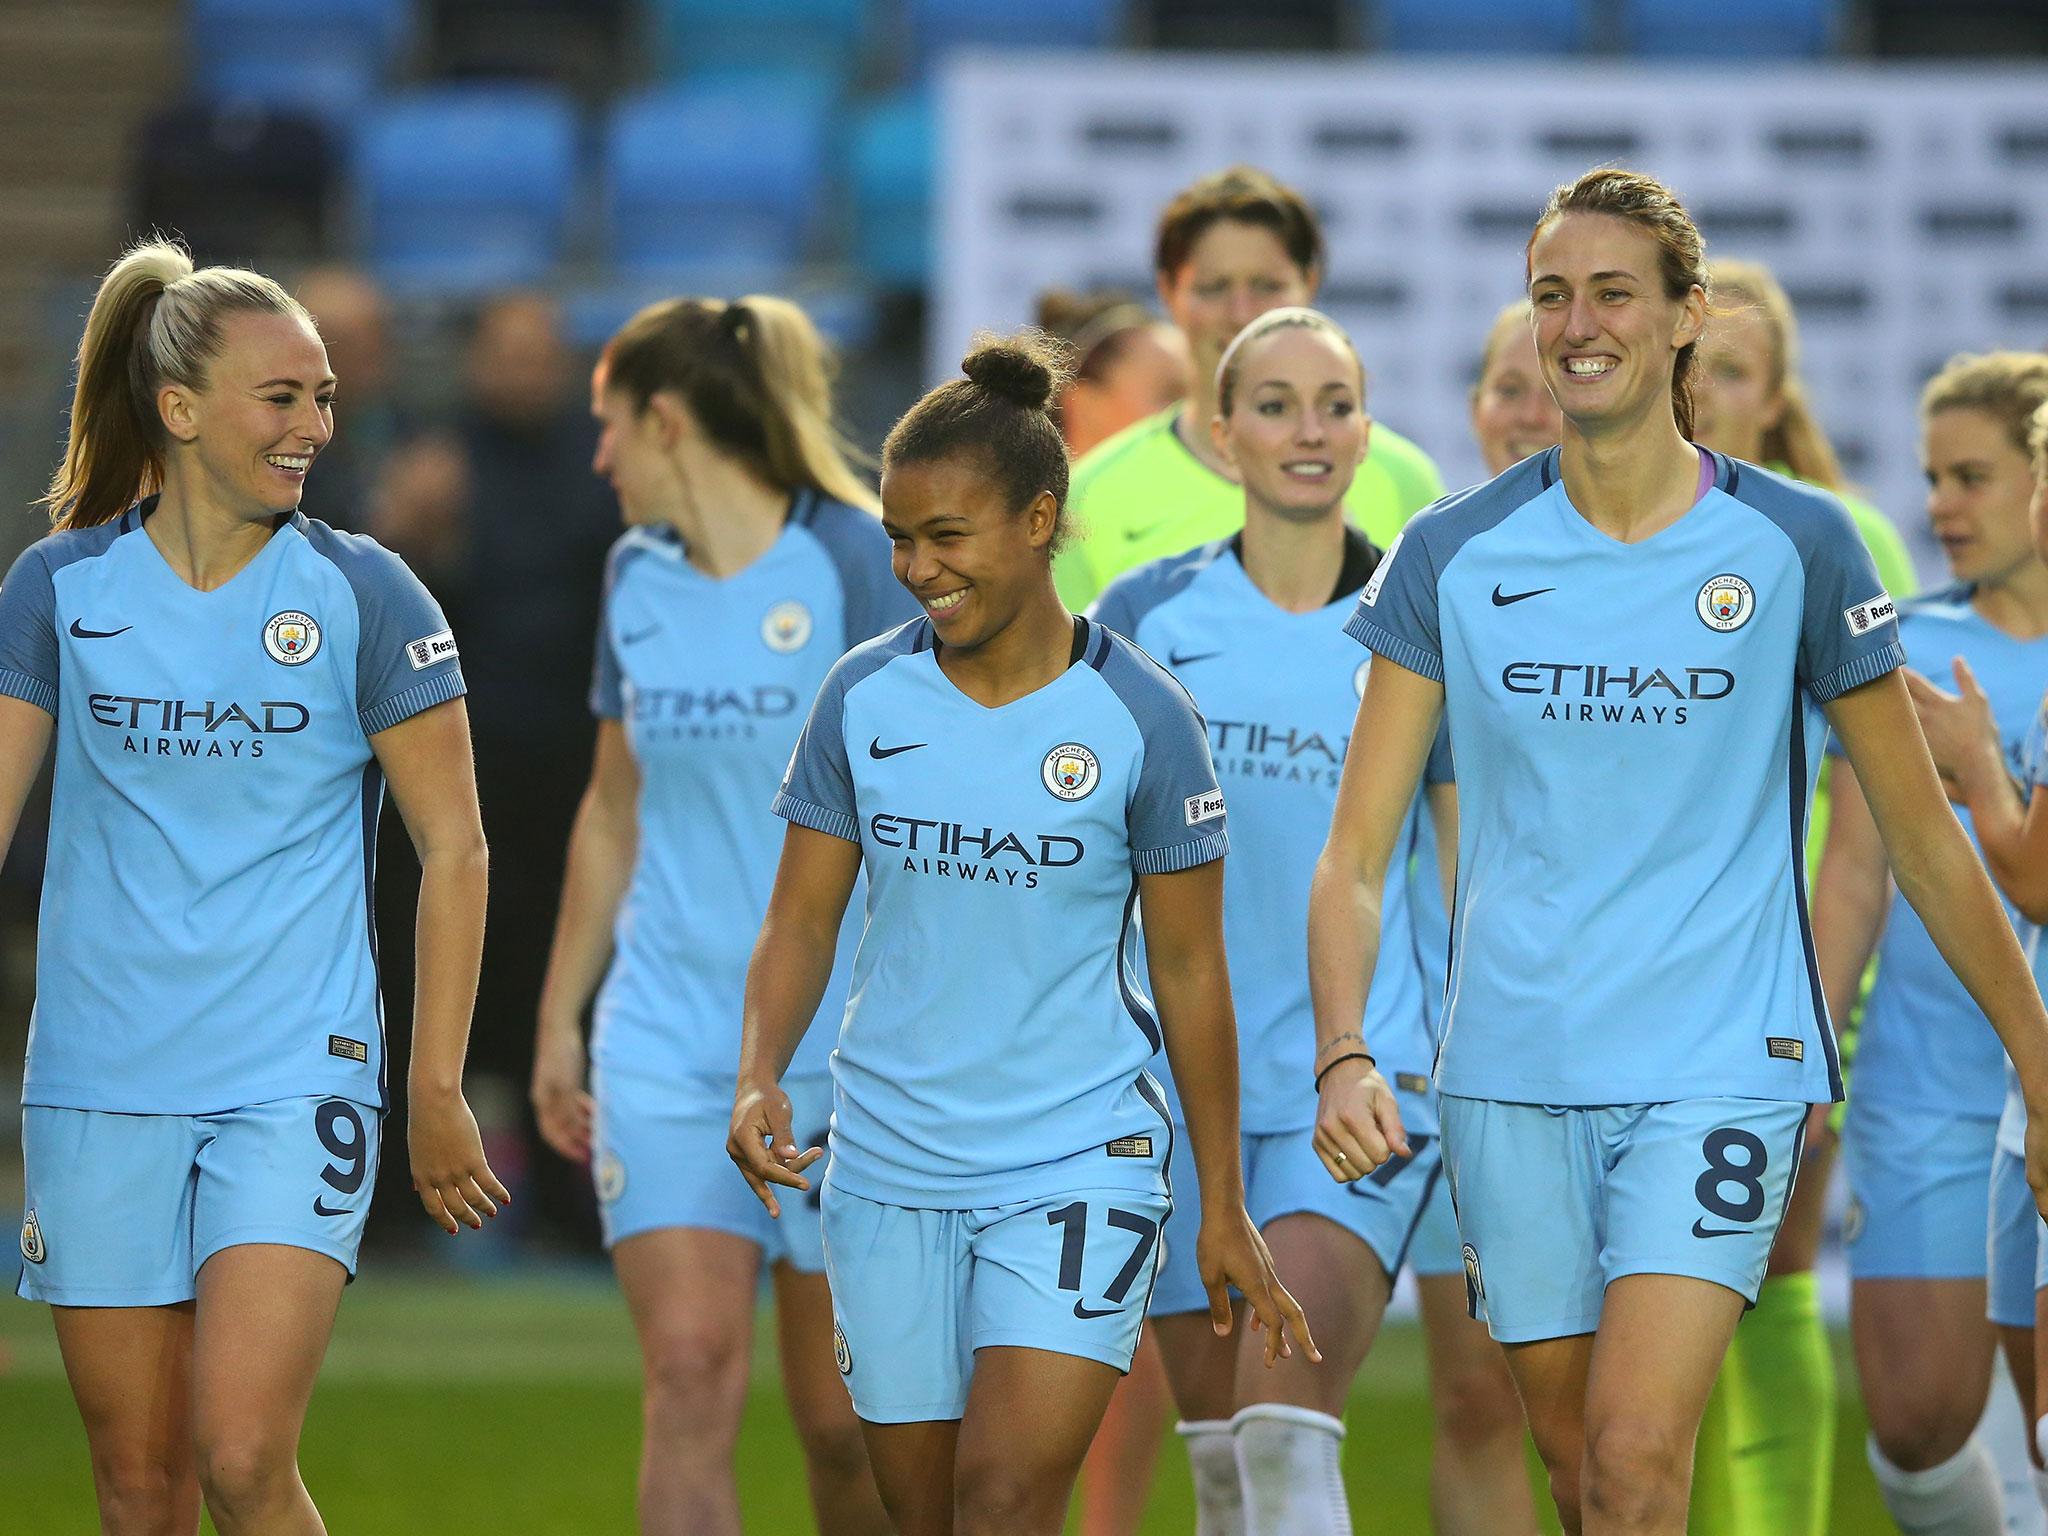 Manchester City sit top of the WSL with a maximum 15 points having won all their games so far this season